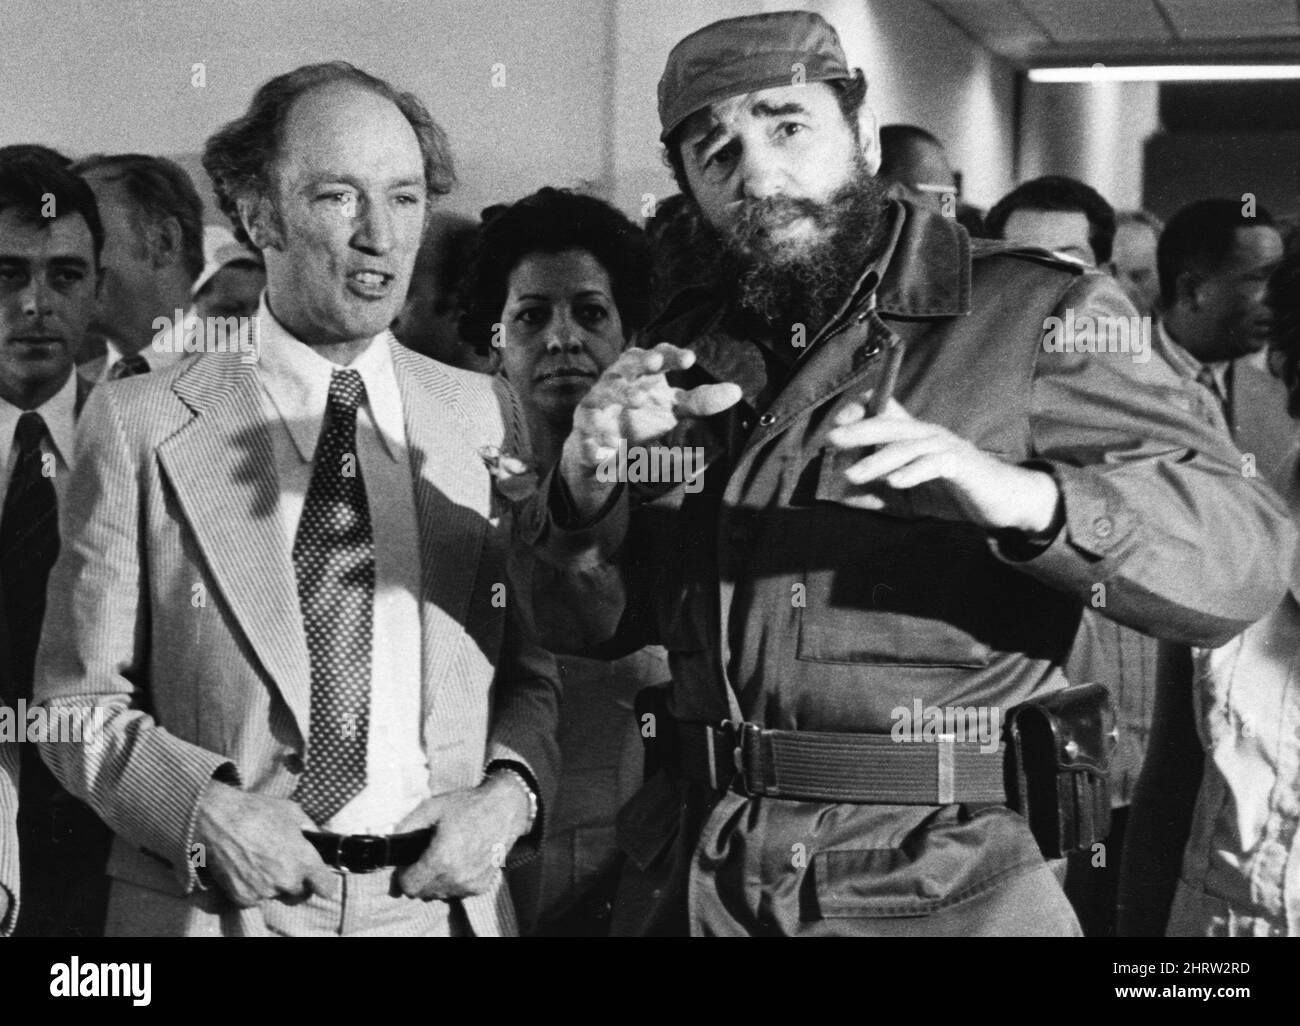 Former prime minister Pierre Trudeau looks on as Cuban President Fidel Castro gestures during a visit ot a Havana housing project. Stock Photo